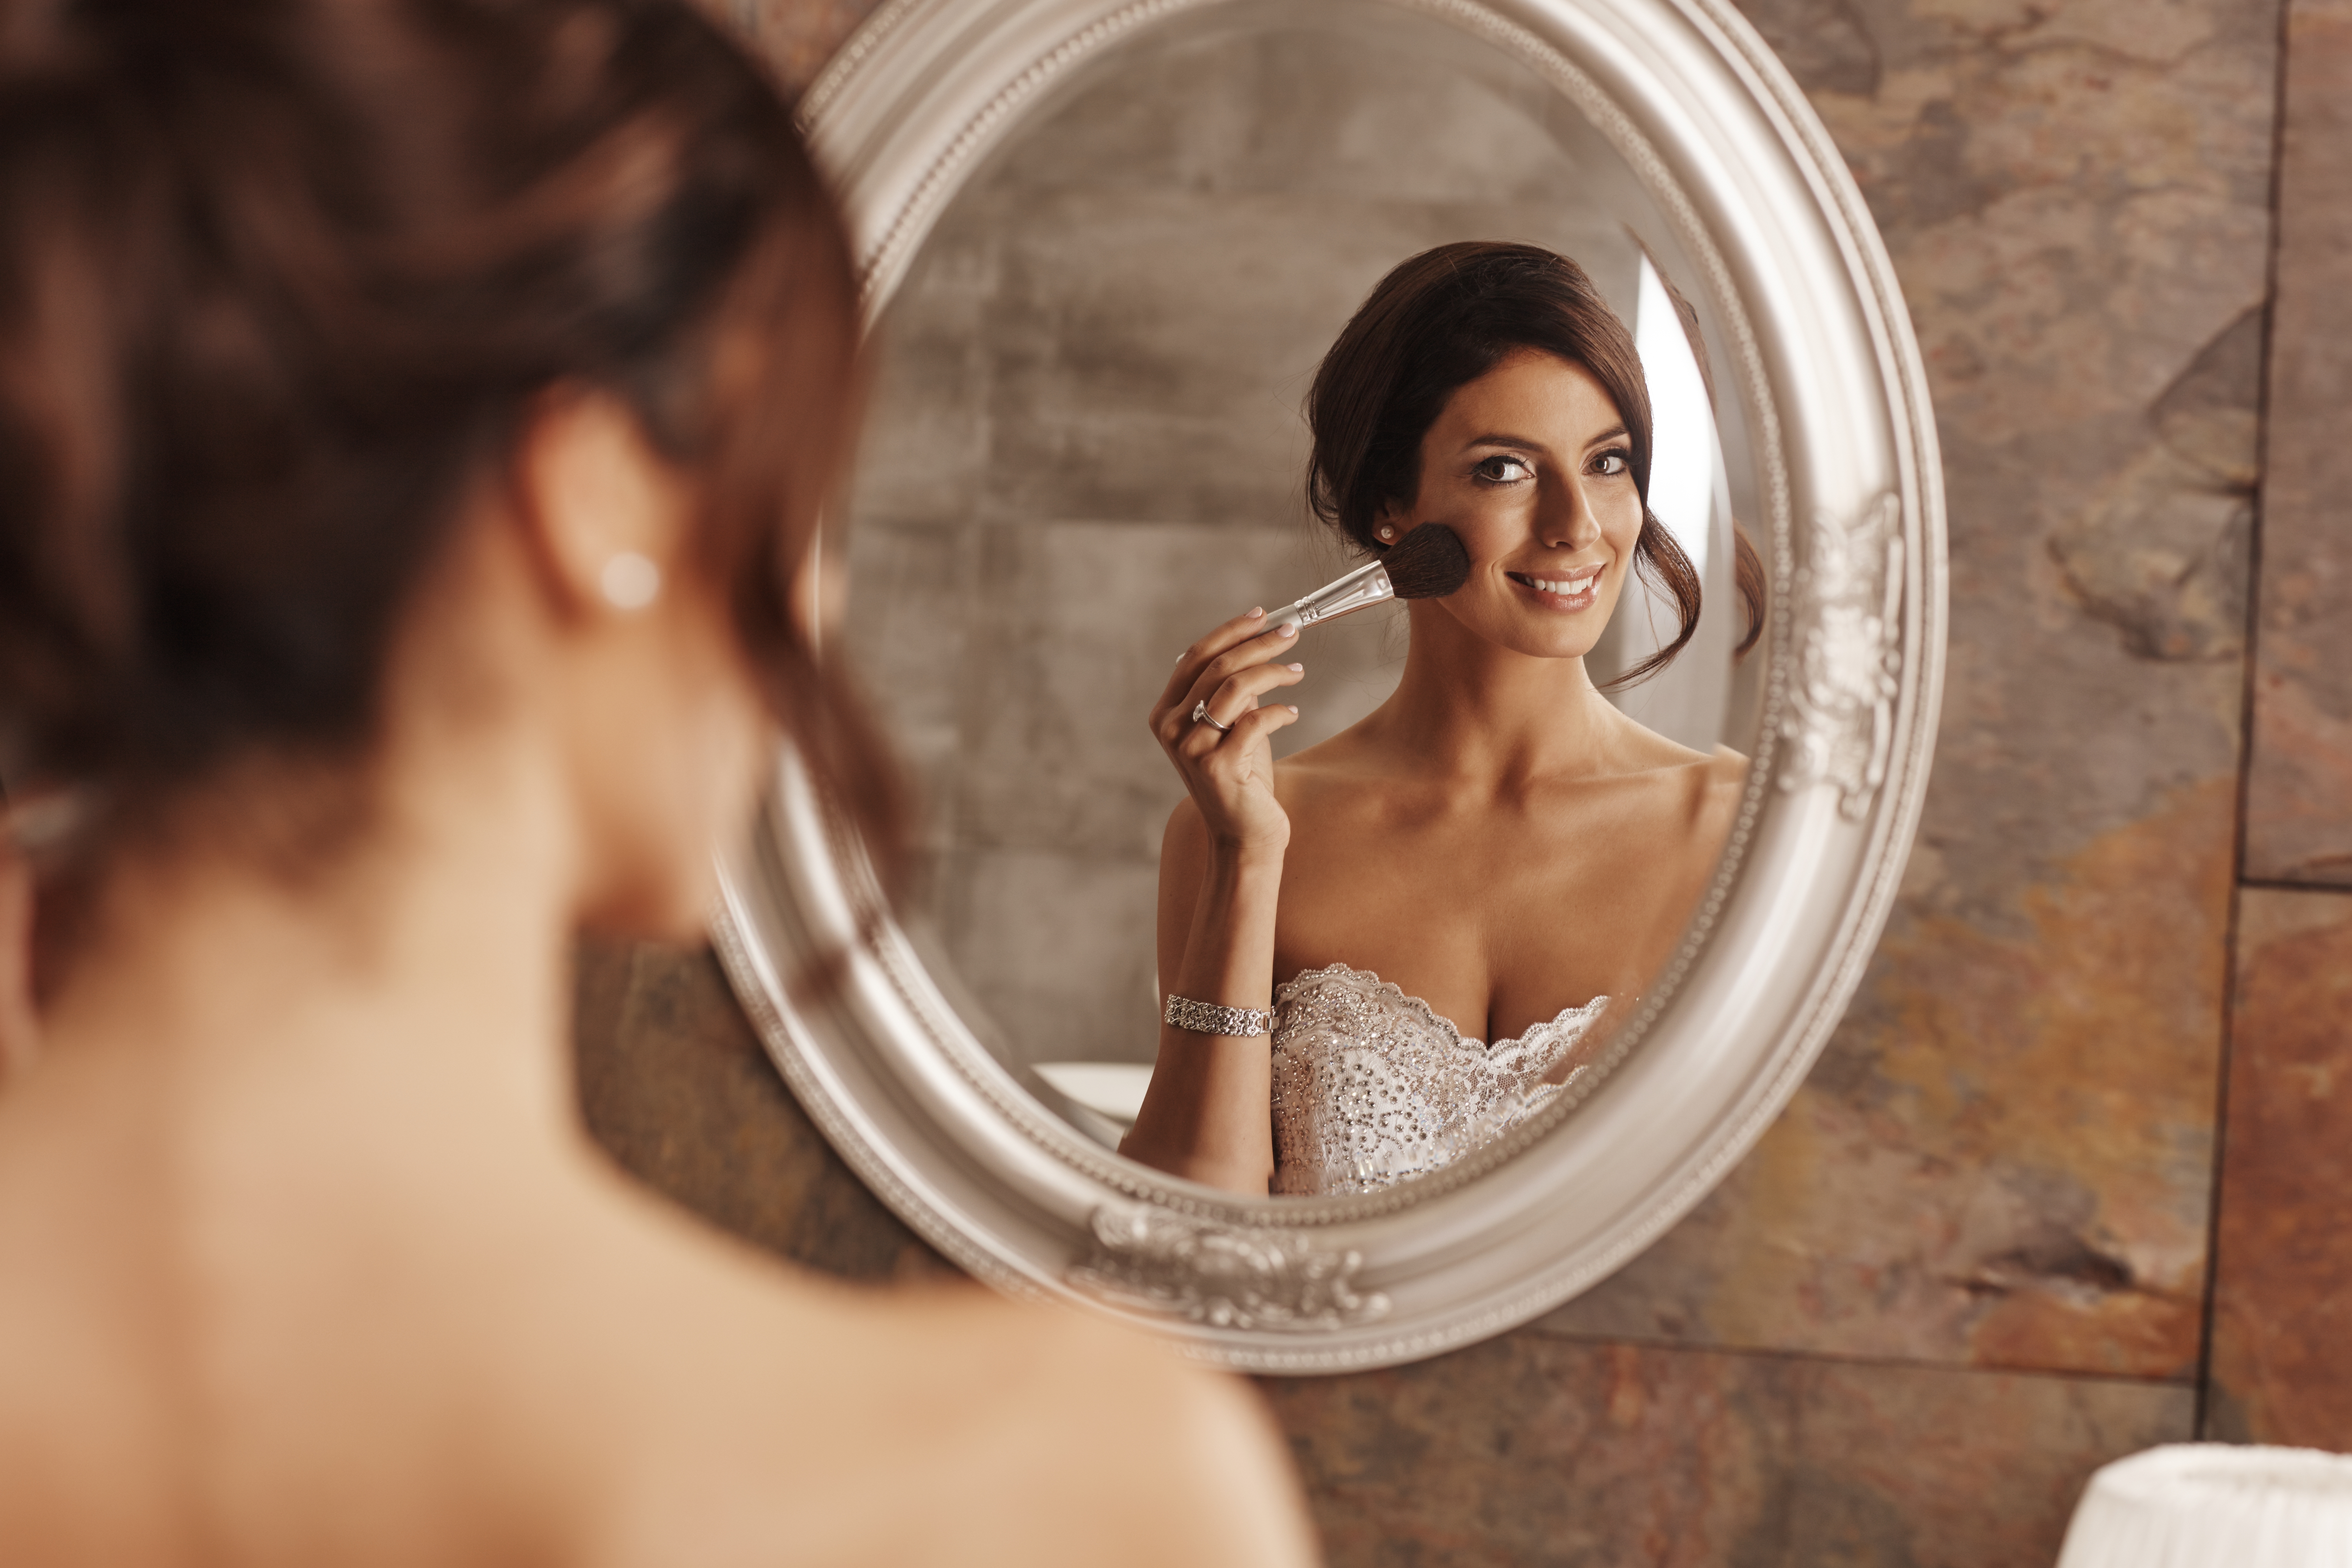 A bride putting on her make up | Source: Shutterstock